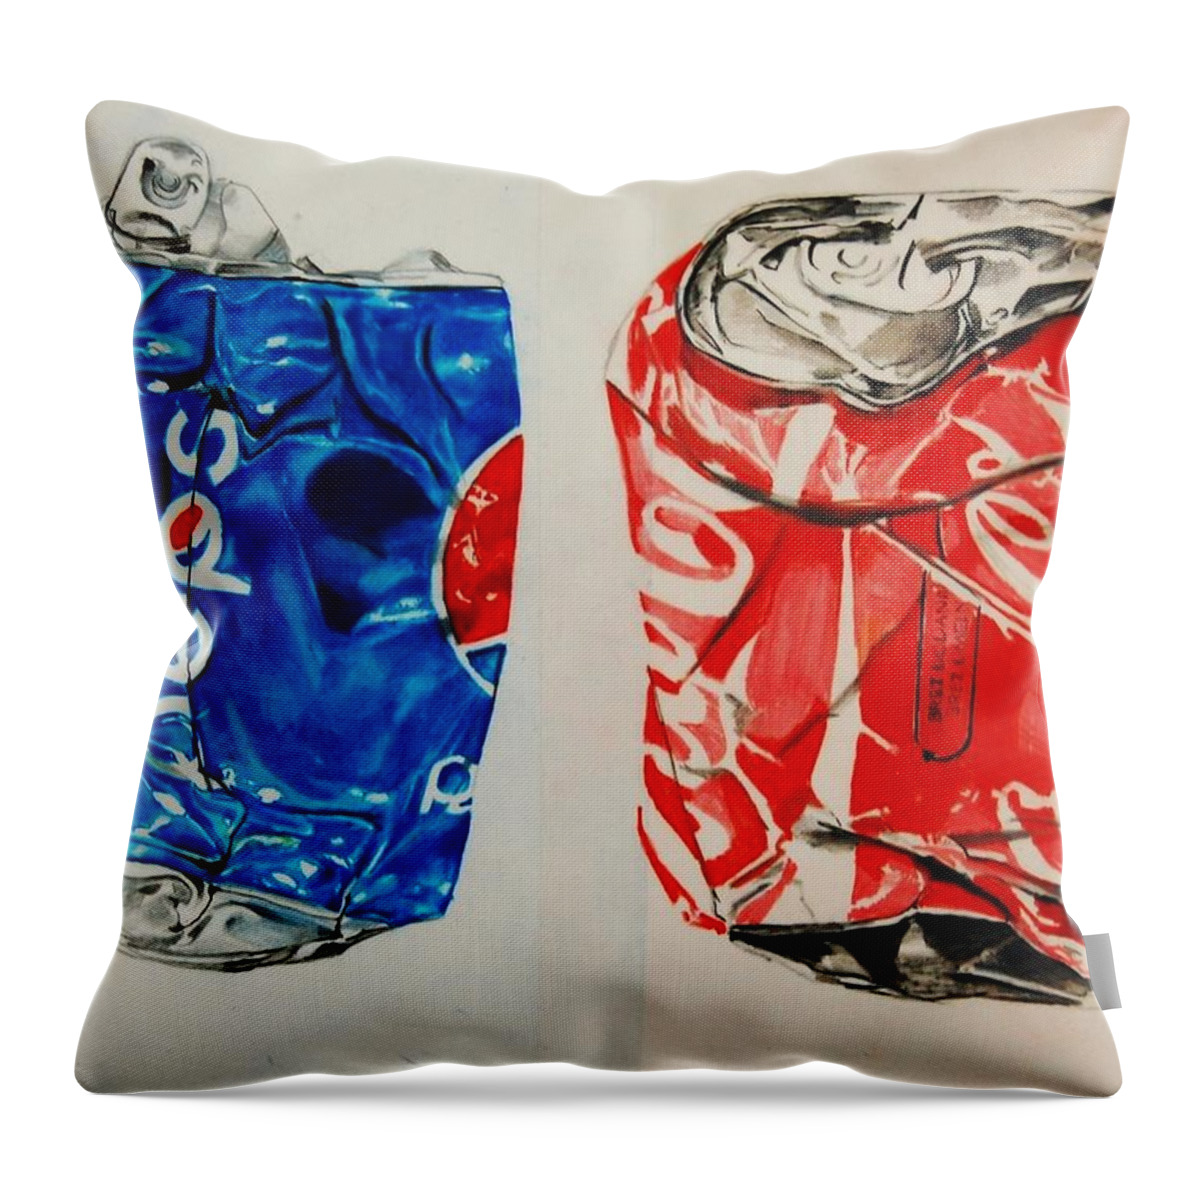 Pepsi Throw Pillow featuring the drawing Versus by Jean Cormier